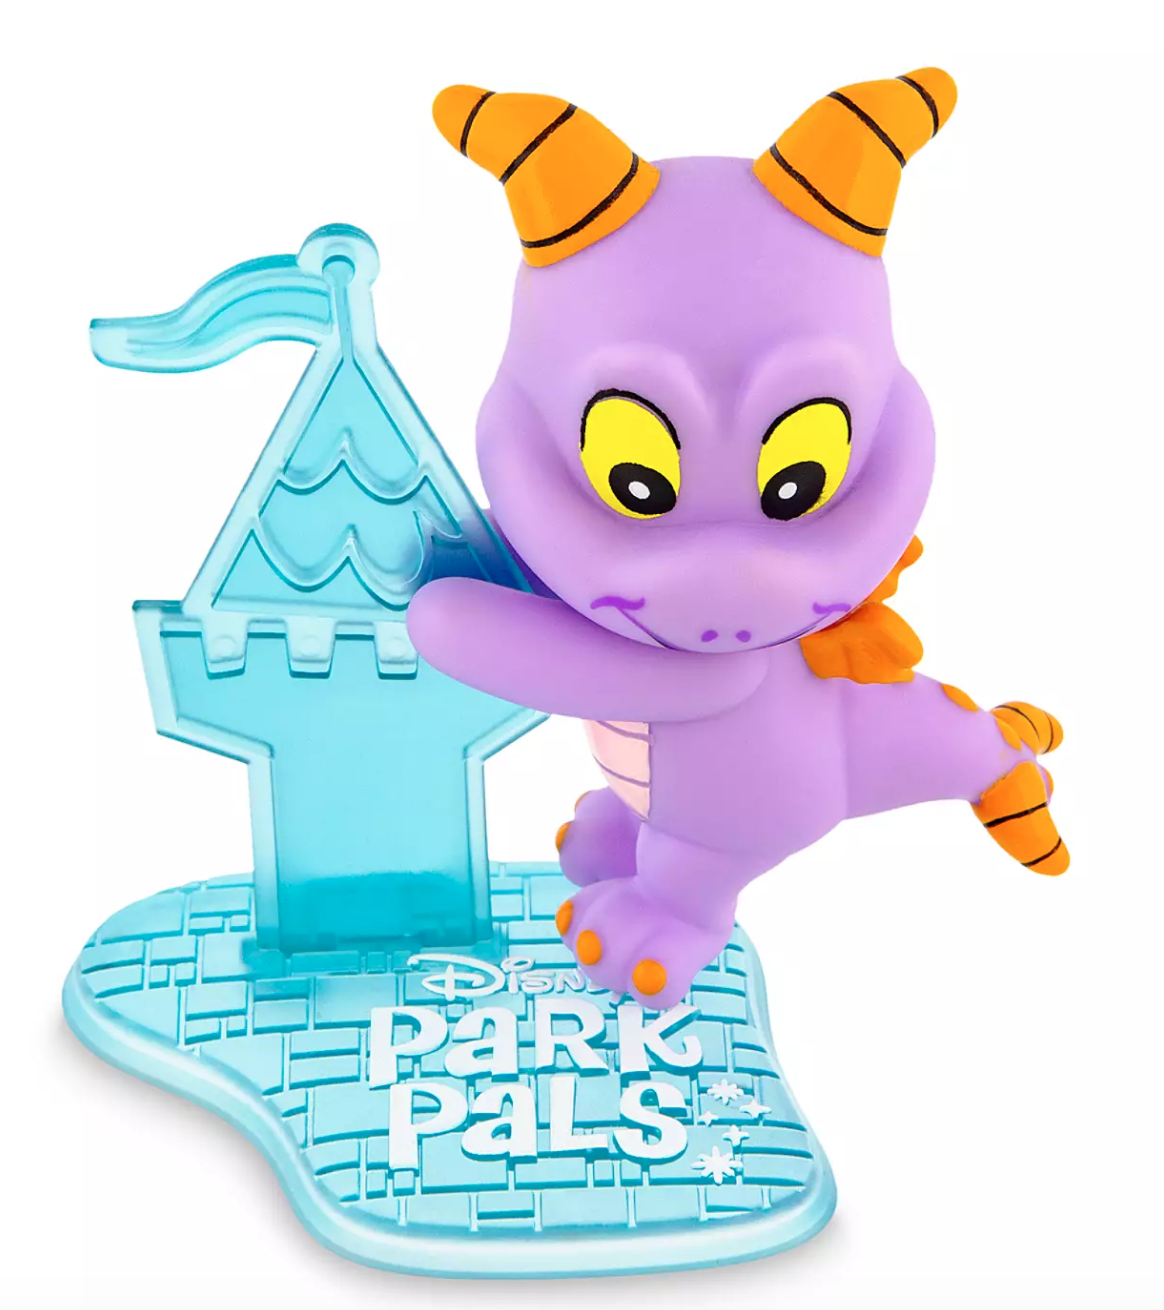 Disney's Park Pals Are Now Available Online Including Figment 